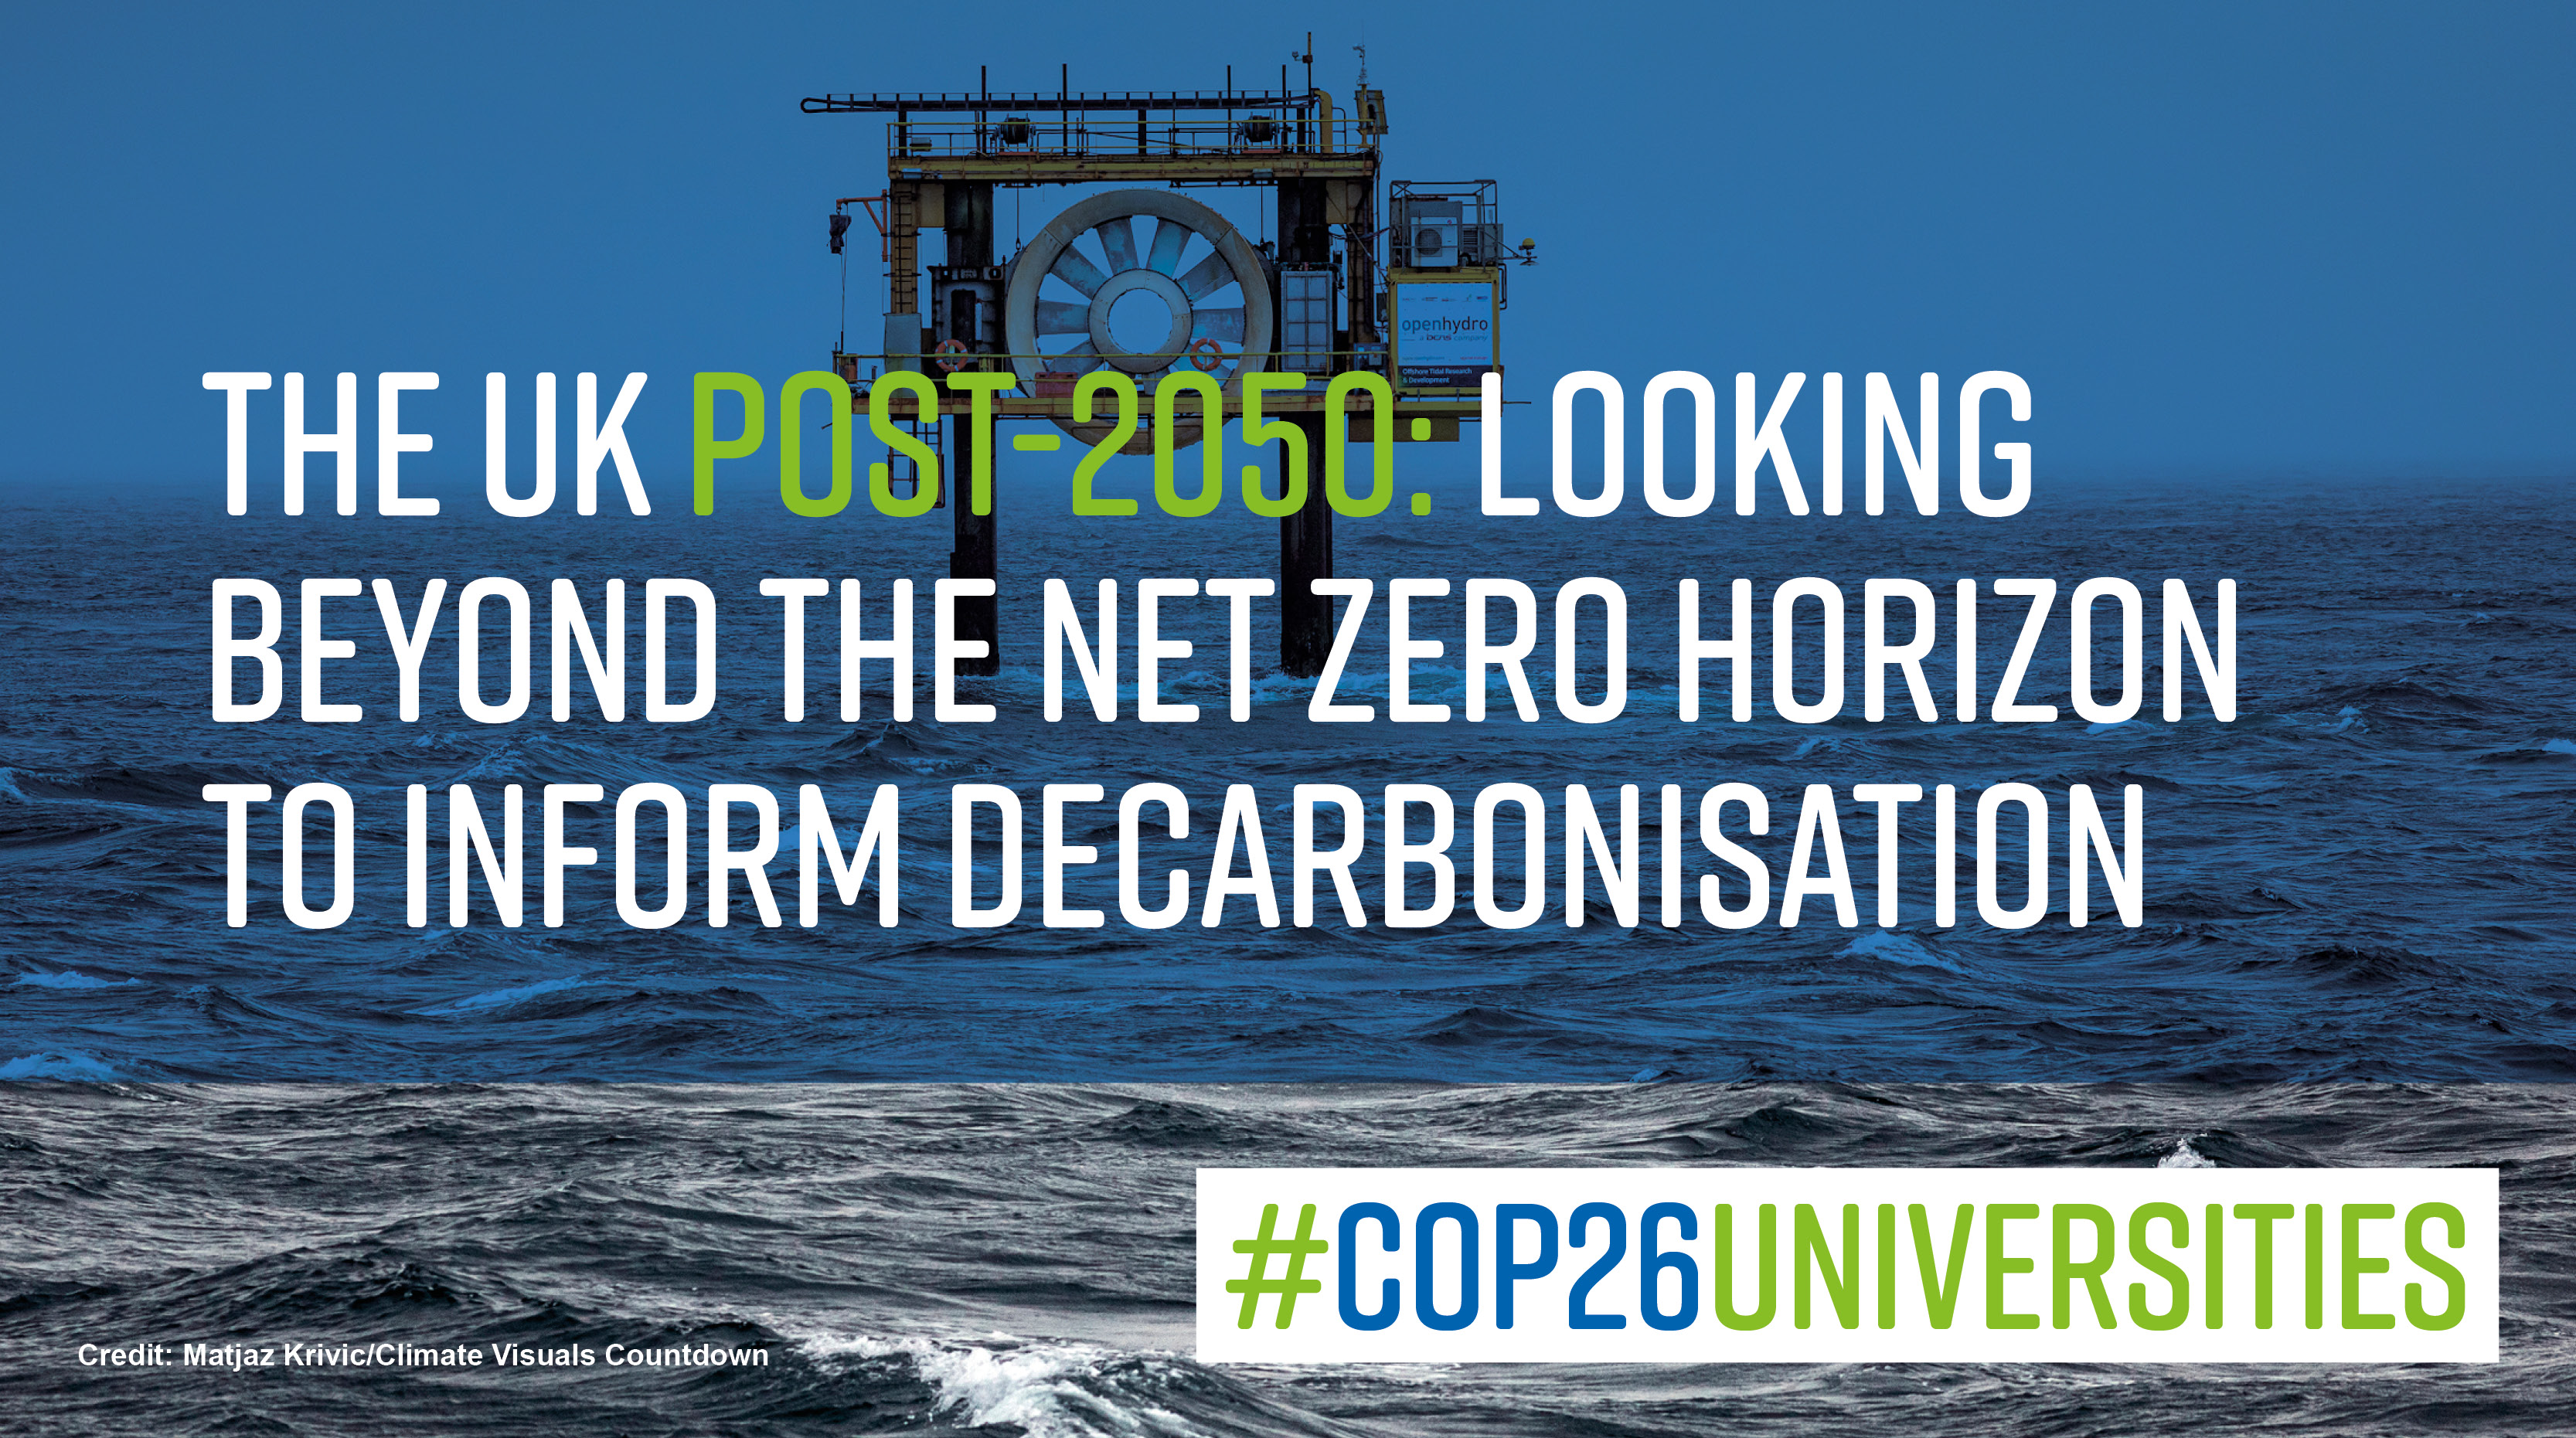 The ocean with overlaid text reading 'The UK post-2050: looking beyond the net zero horizon to inform decarbonisation'